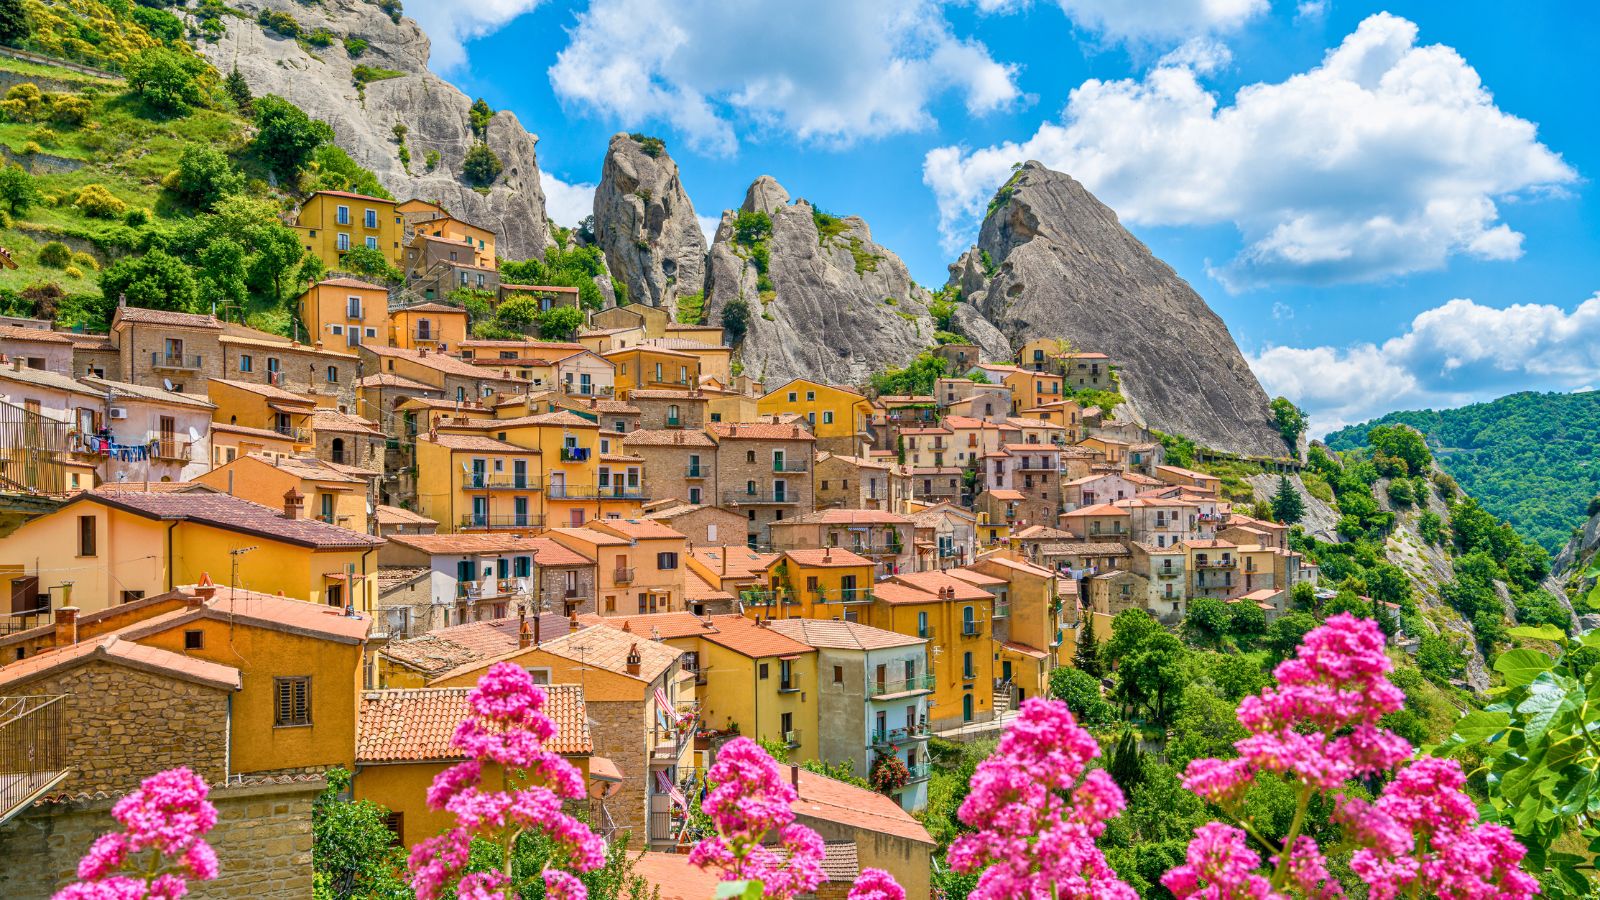 <p><span>Few Italian towns have a location as unique as Castelmezzano. Picturesque is an understatement – it’s like something from a fairytale.</span></p><p><span>You’ll find it in the Dolomiti Lucane mountain range in southern Italy’s Basilicata region. Expect traditional terracotta rooves sandwiched between mountain peaks, with panoramic views over the area. History, adventure, and outdoor opportunities await.</span></p>